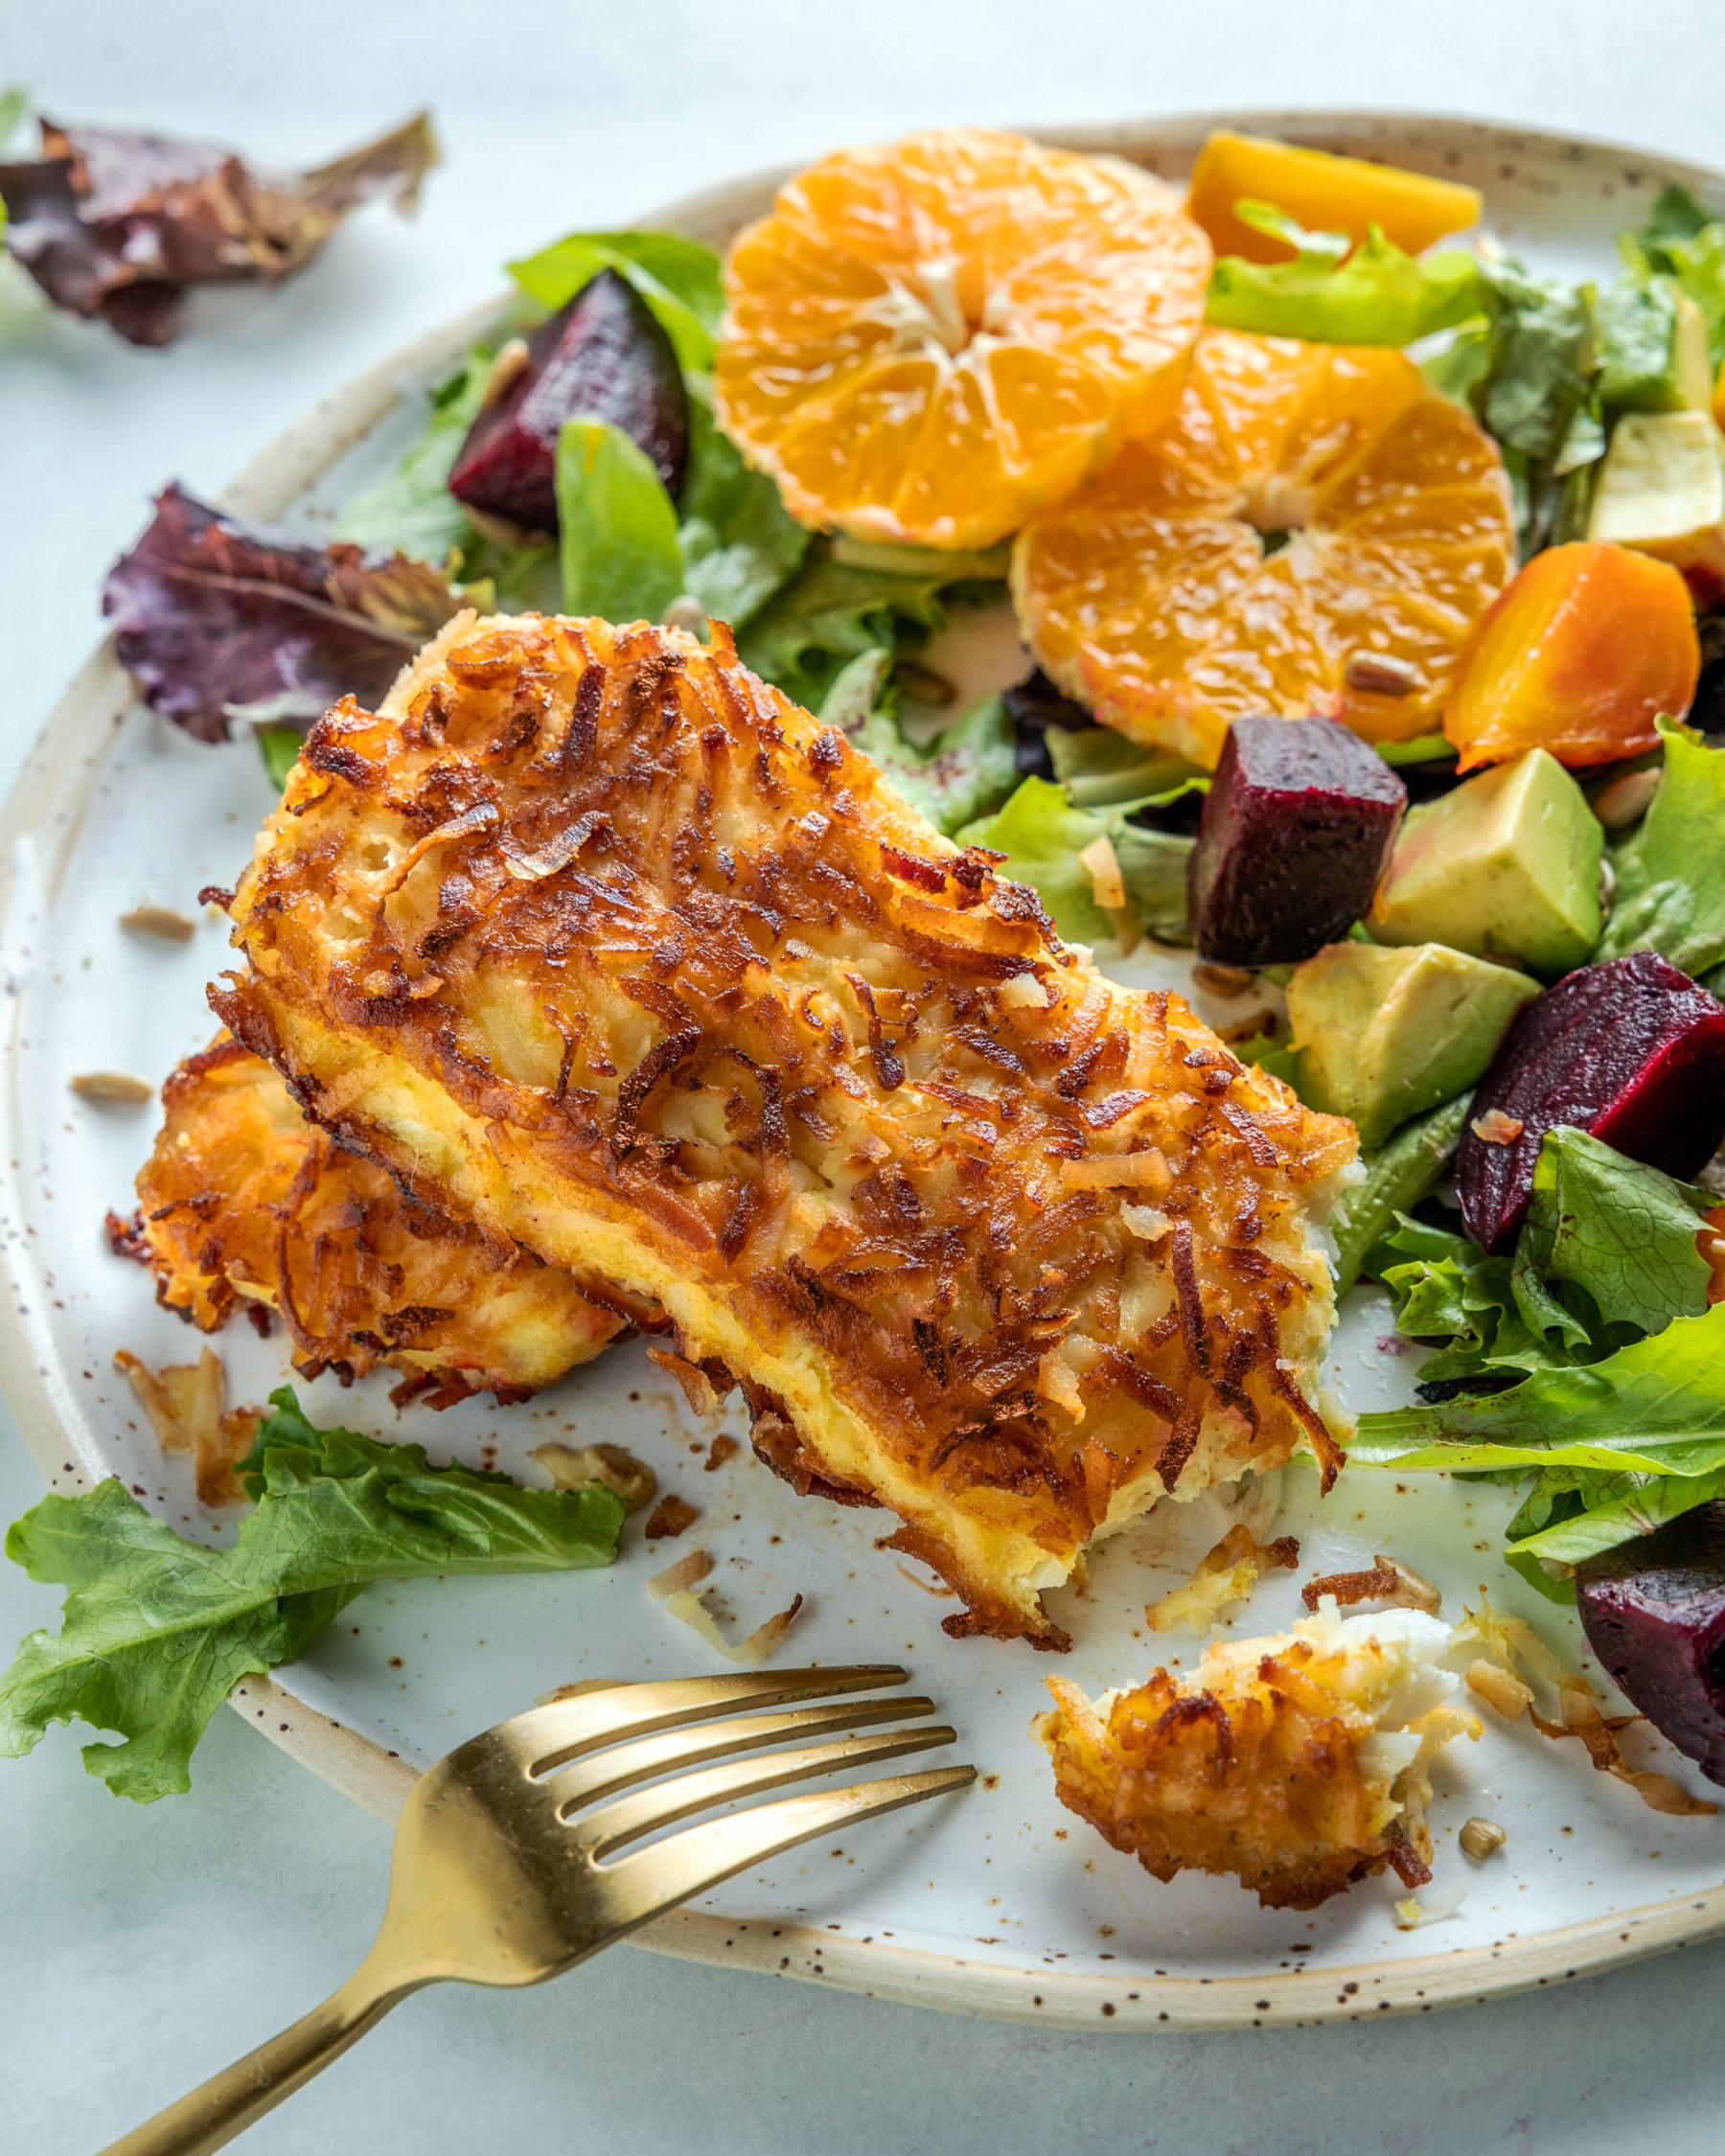 Whole30 Coconut-Crusted Fish - The Whole30® Program